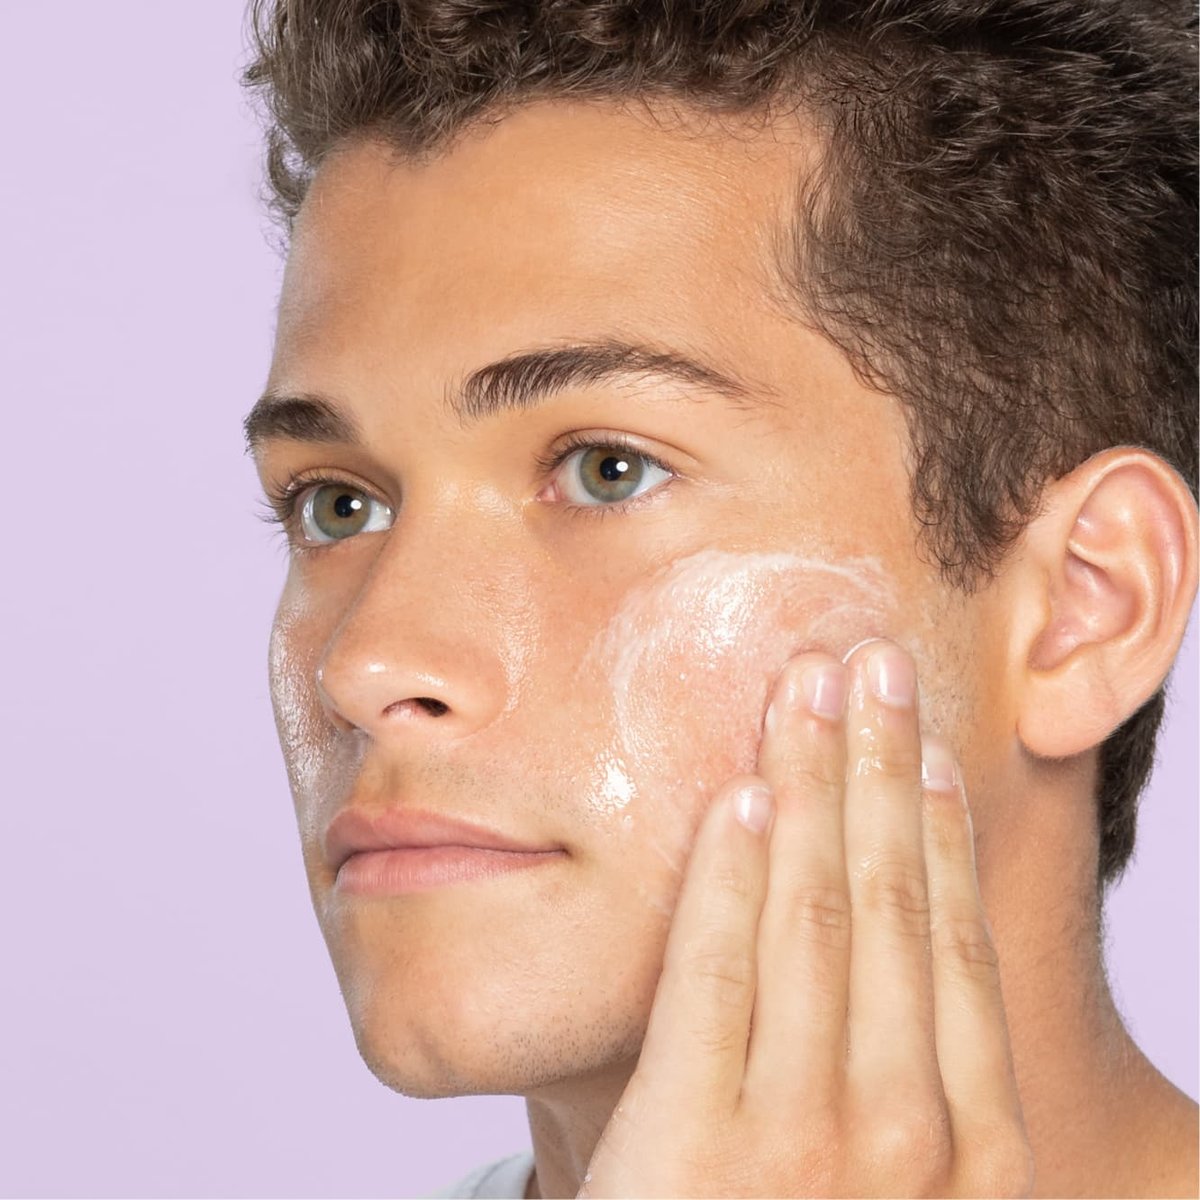 Young teen with hazel eyes and light brown hair applies foaming Night Relaxing face wash to cheek in front of light purple background